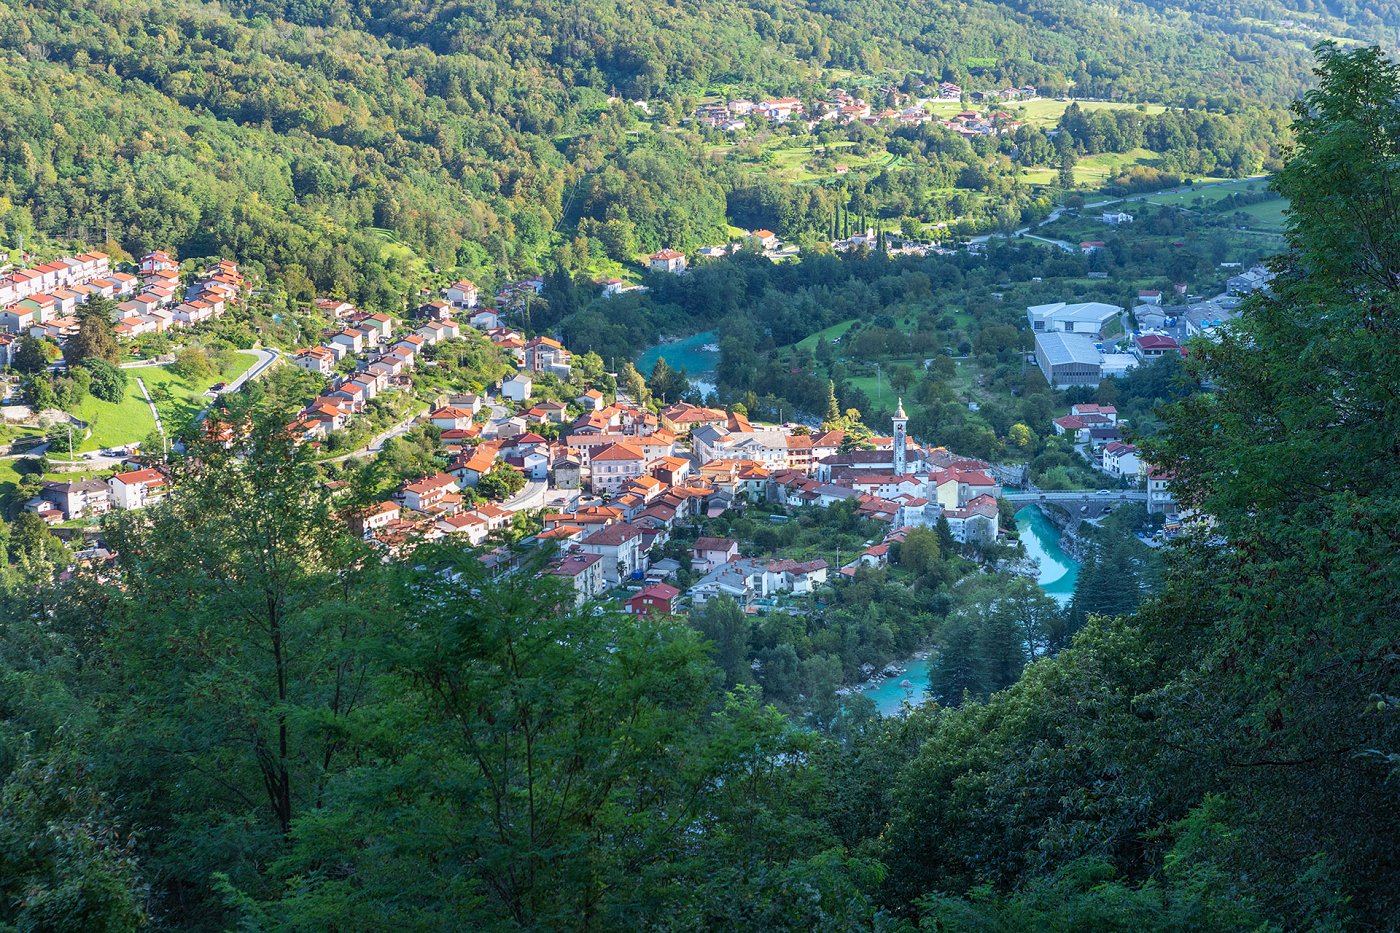 View of the town of Kanal past which the river Soča flows